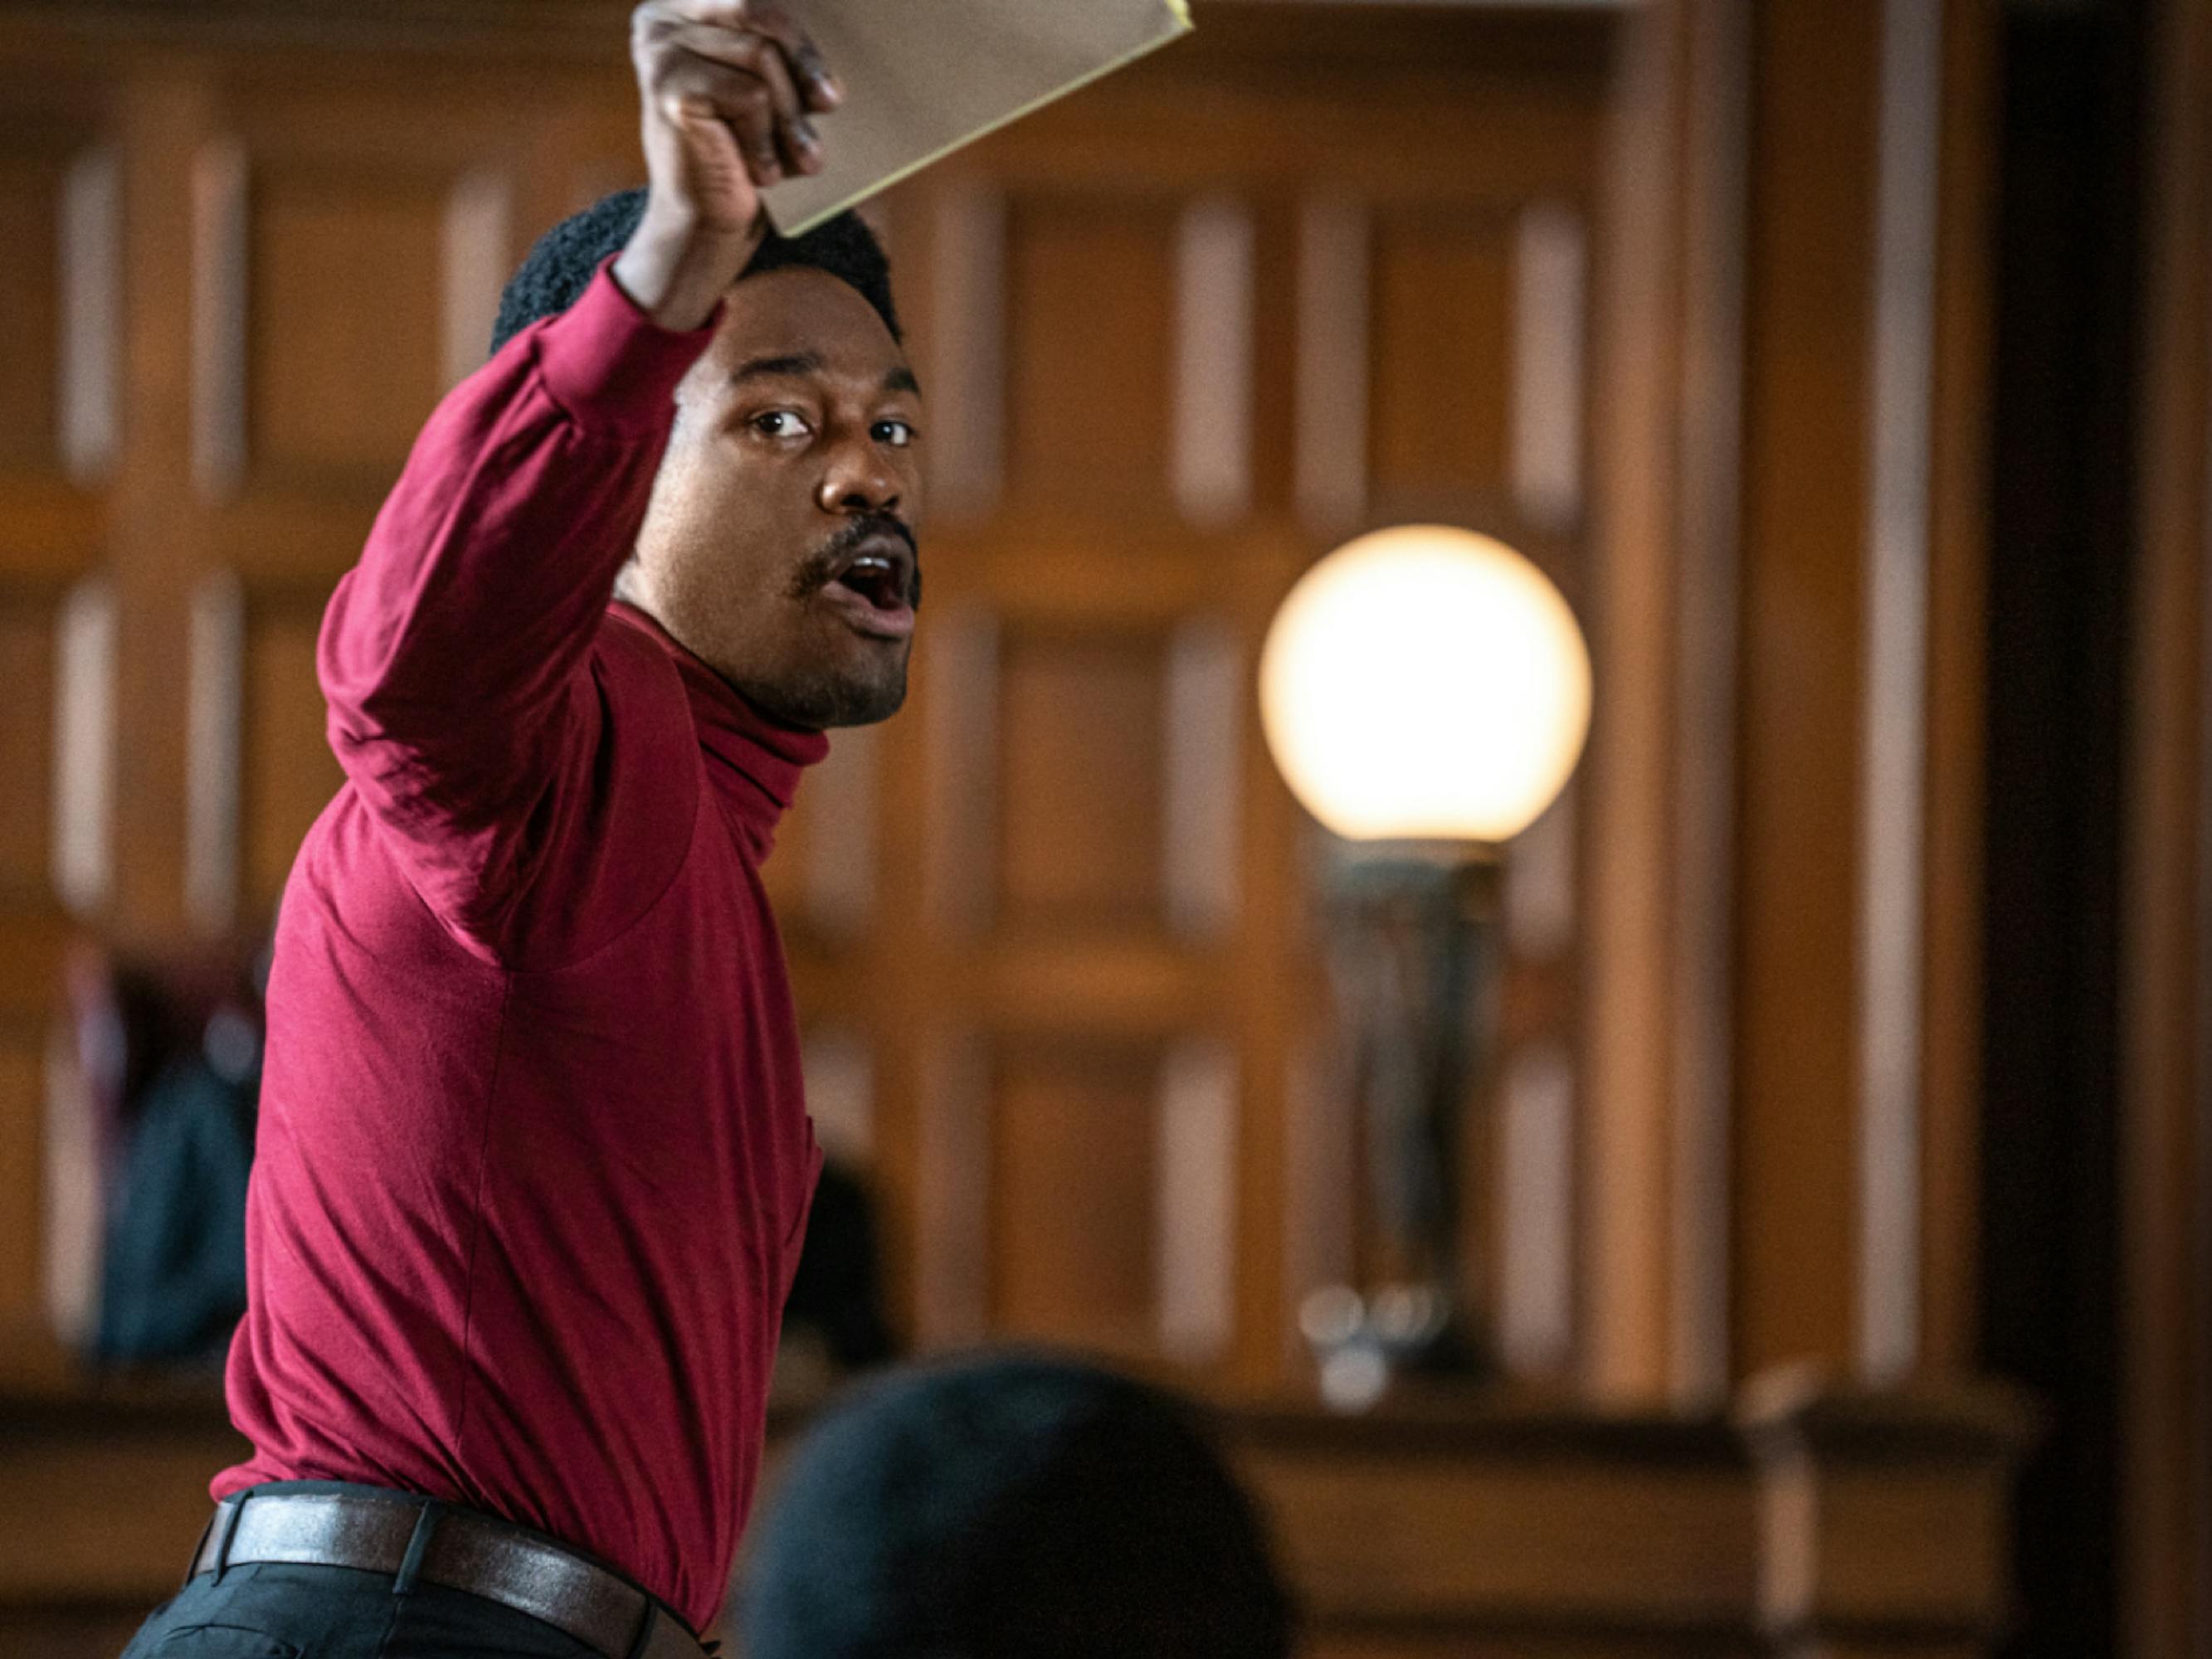 Abdul-Mateen as Bobby Seale in a courtroom scene from The Trial of the Chicago 7. He wears a red turtleneck and holds up a pad of paper, portraying Seale as he made the case that he was being denied his constitutional right to a defense.